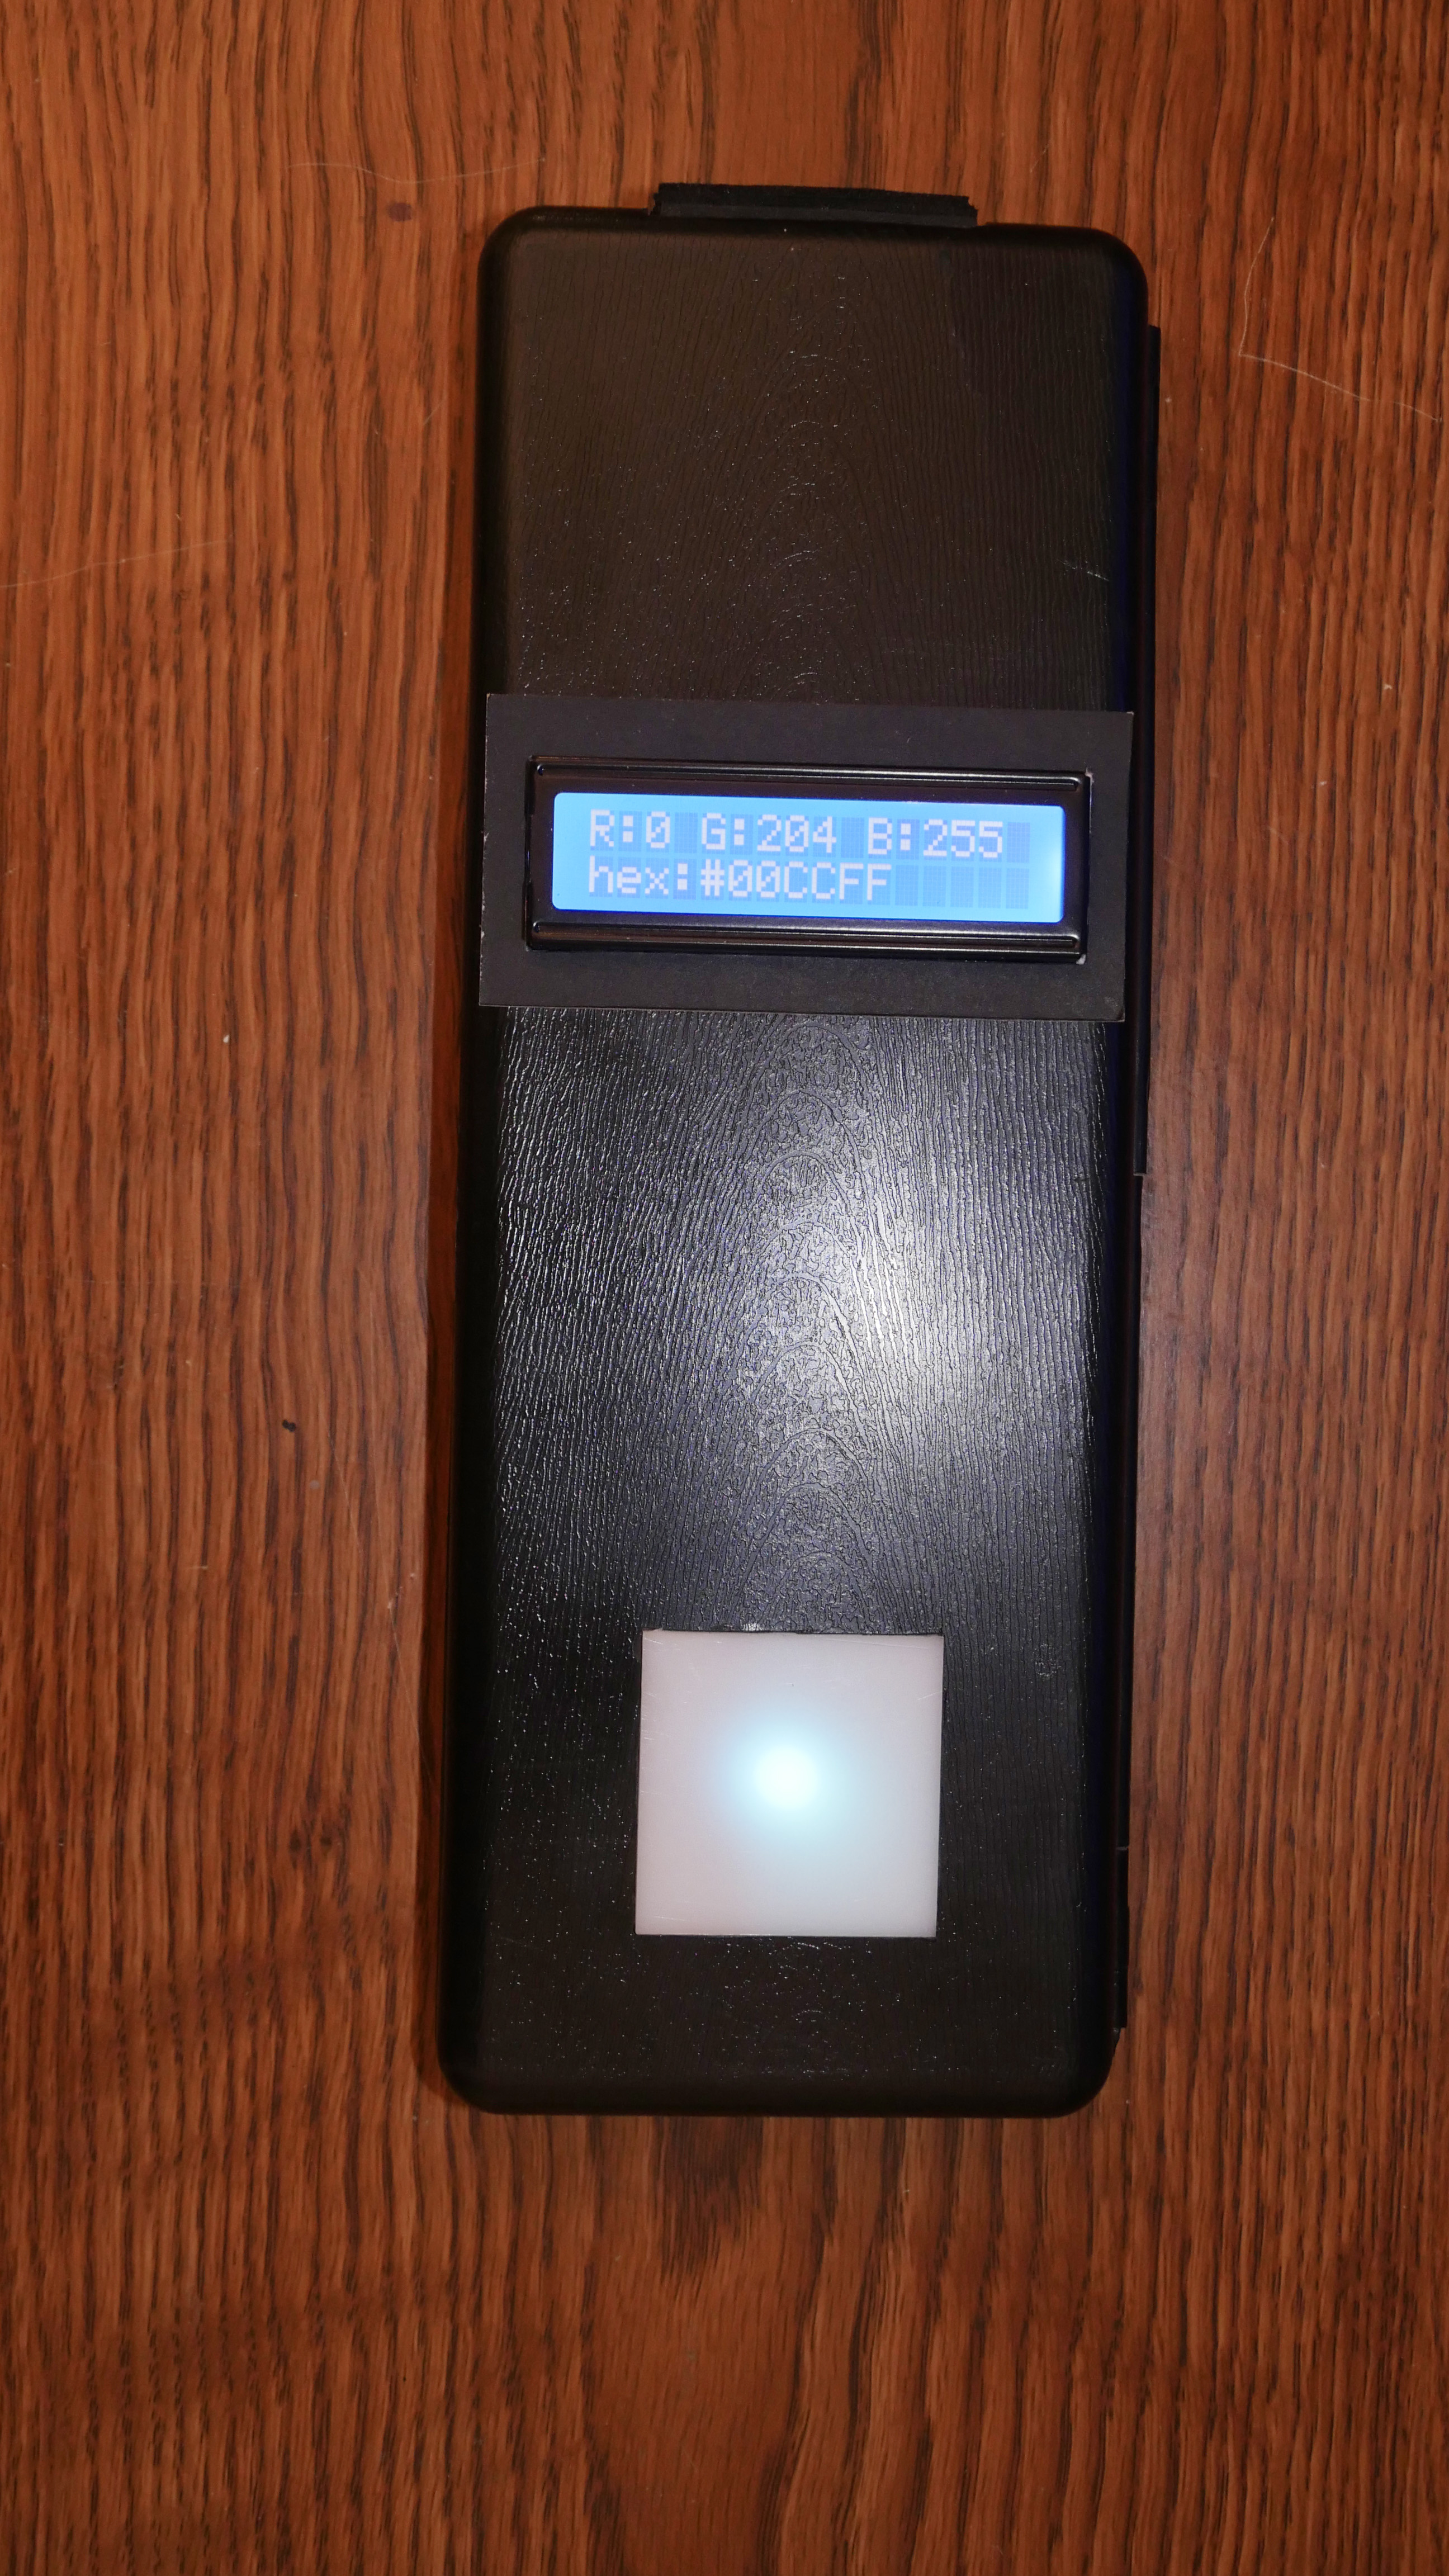 Completed colorimeter